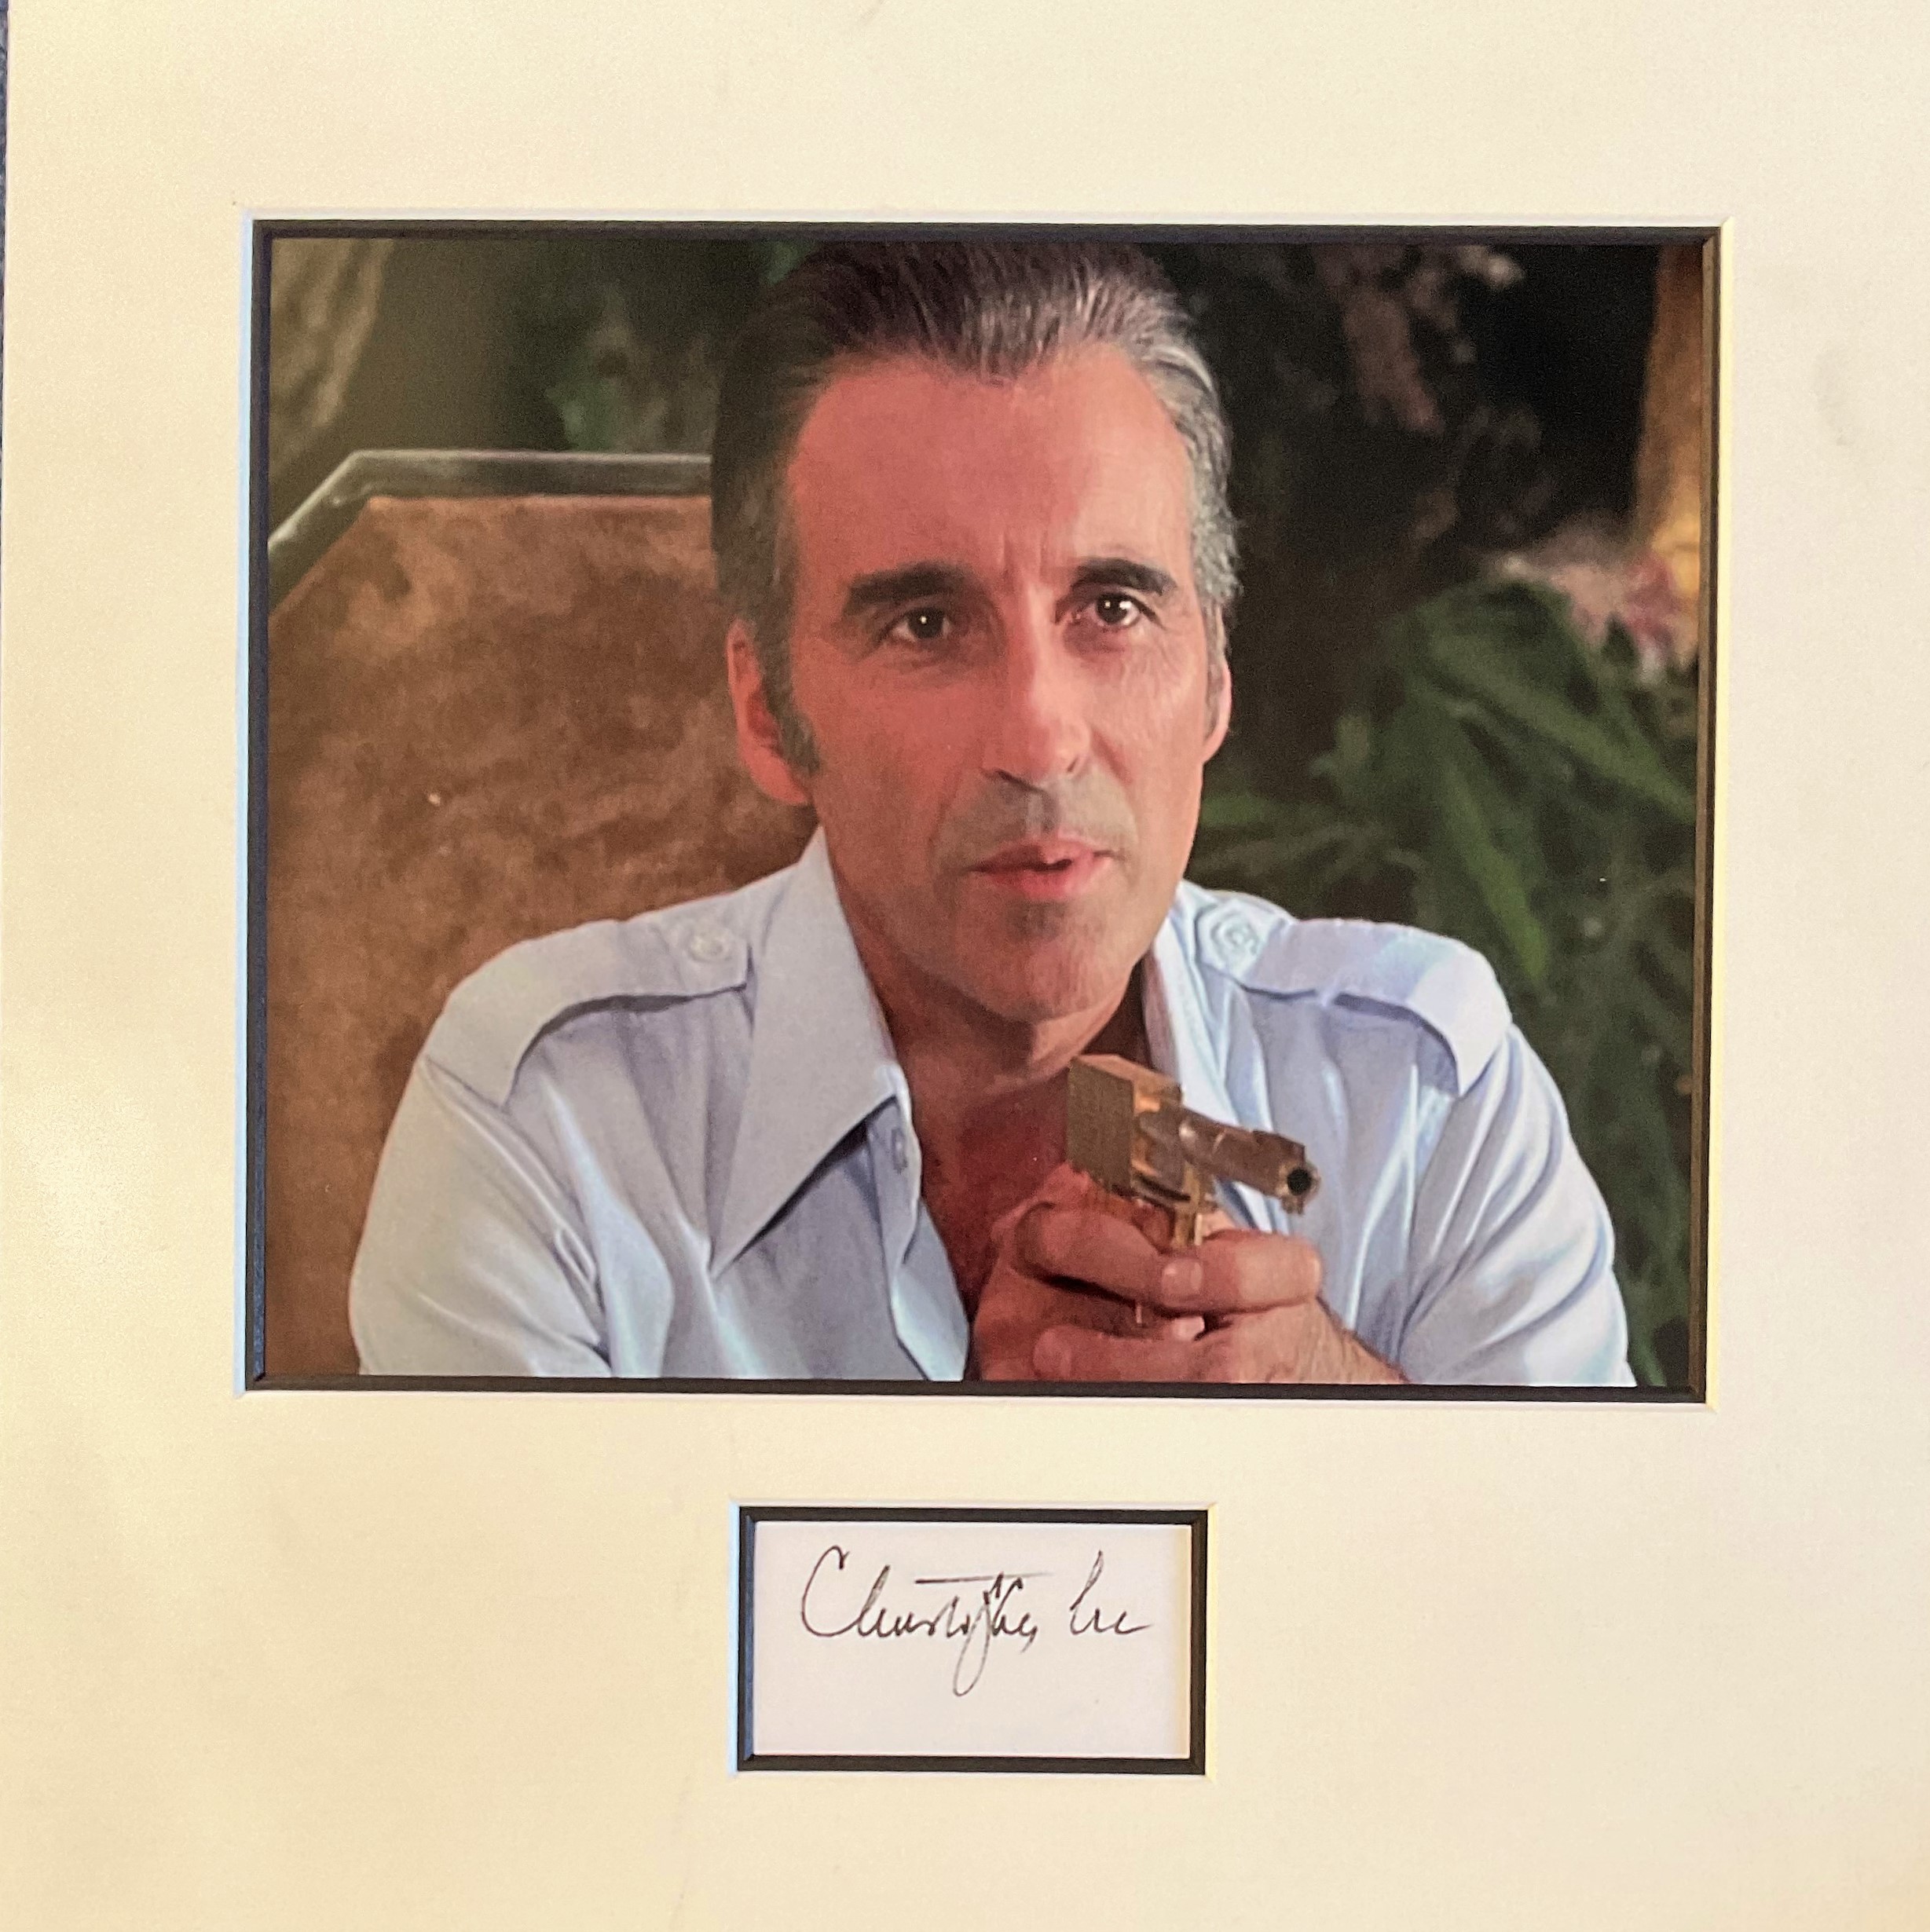 Sir Christopher Lee CBE, CStJ Star Wars, Lord Of The Rings and James Bond Handsigned Signature